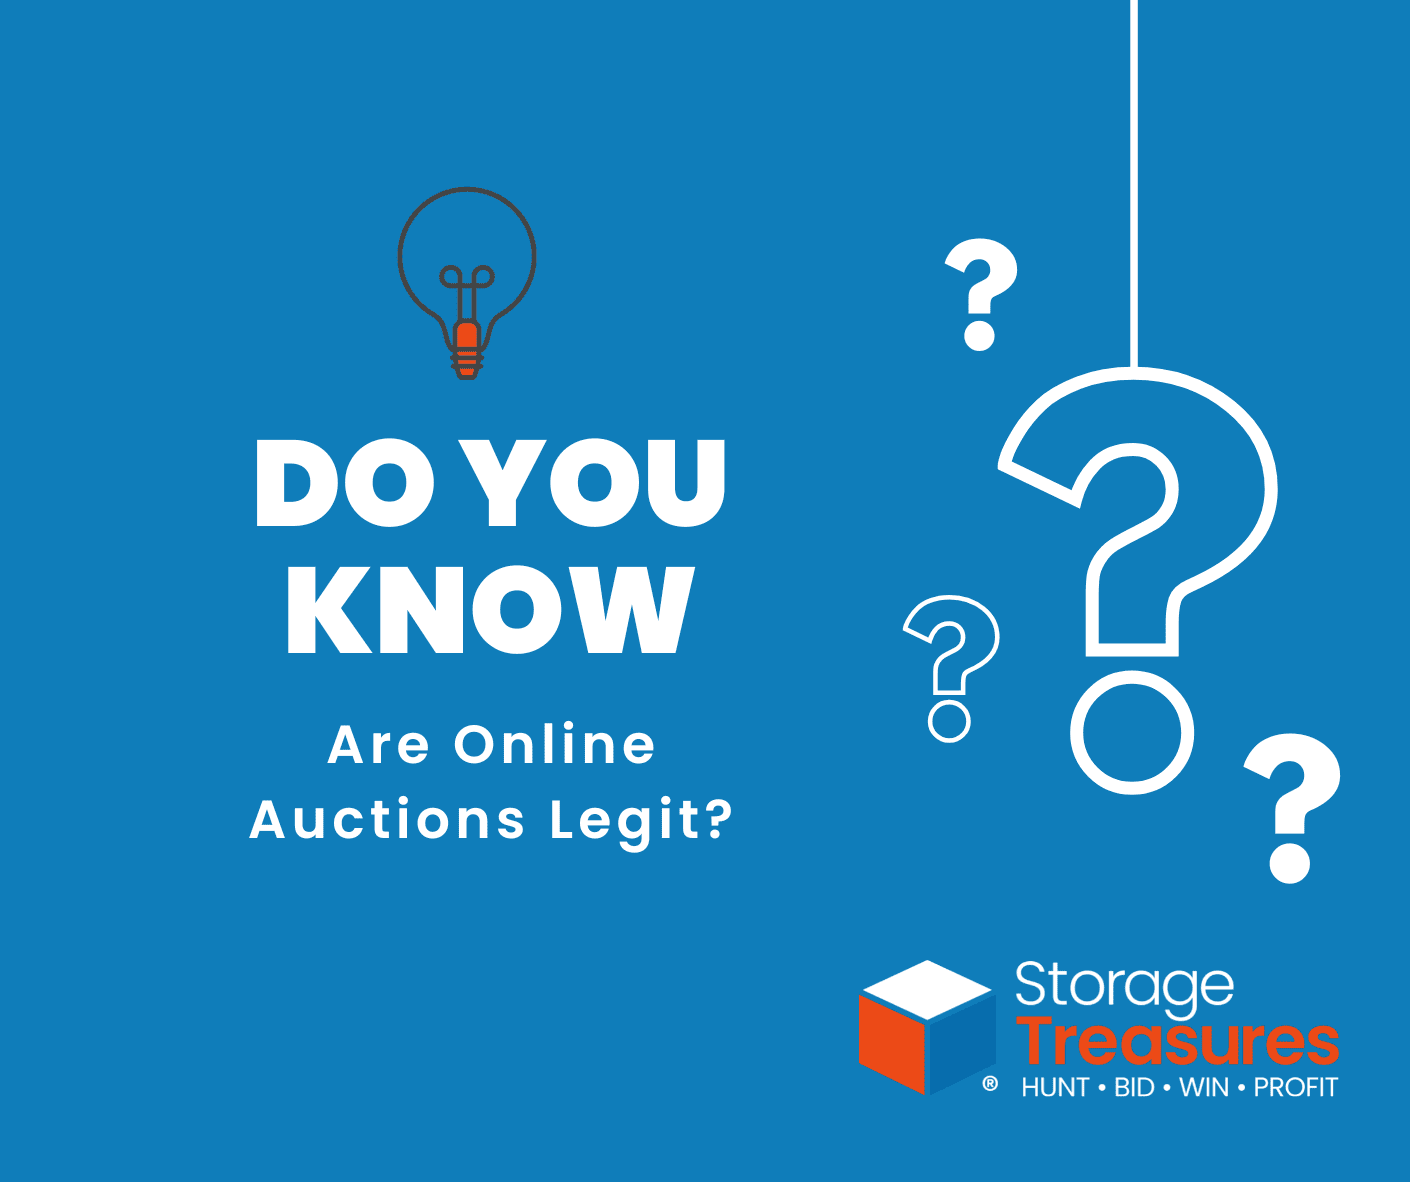 Are online auctions legit? Check out this blog post to find out.